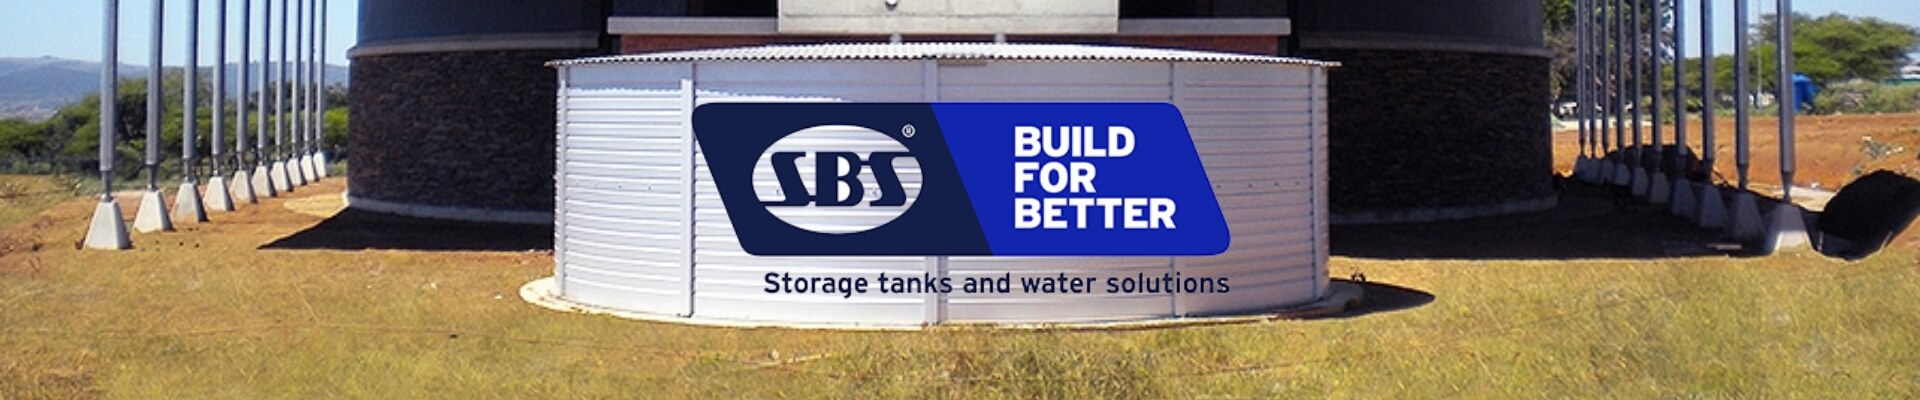 Water quality with a premium storage solution